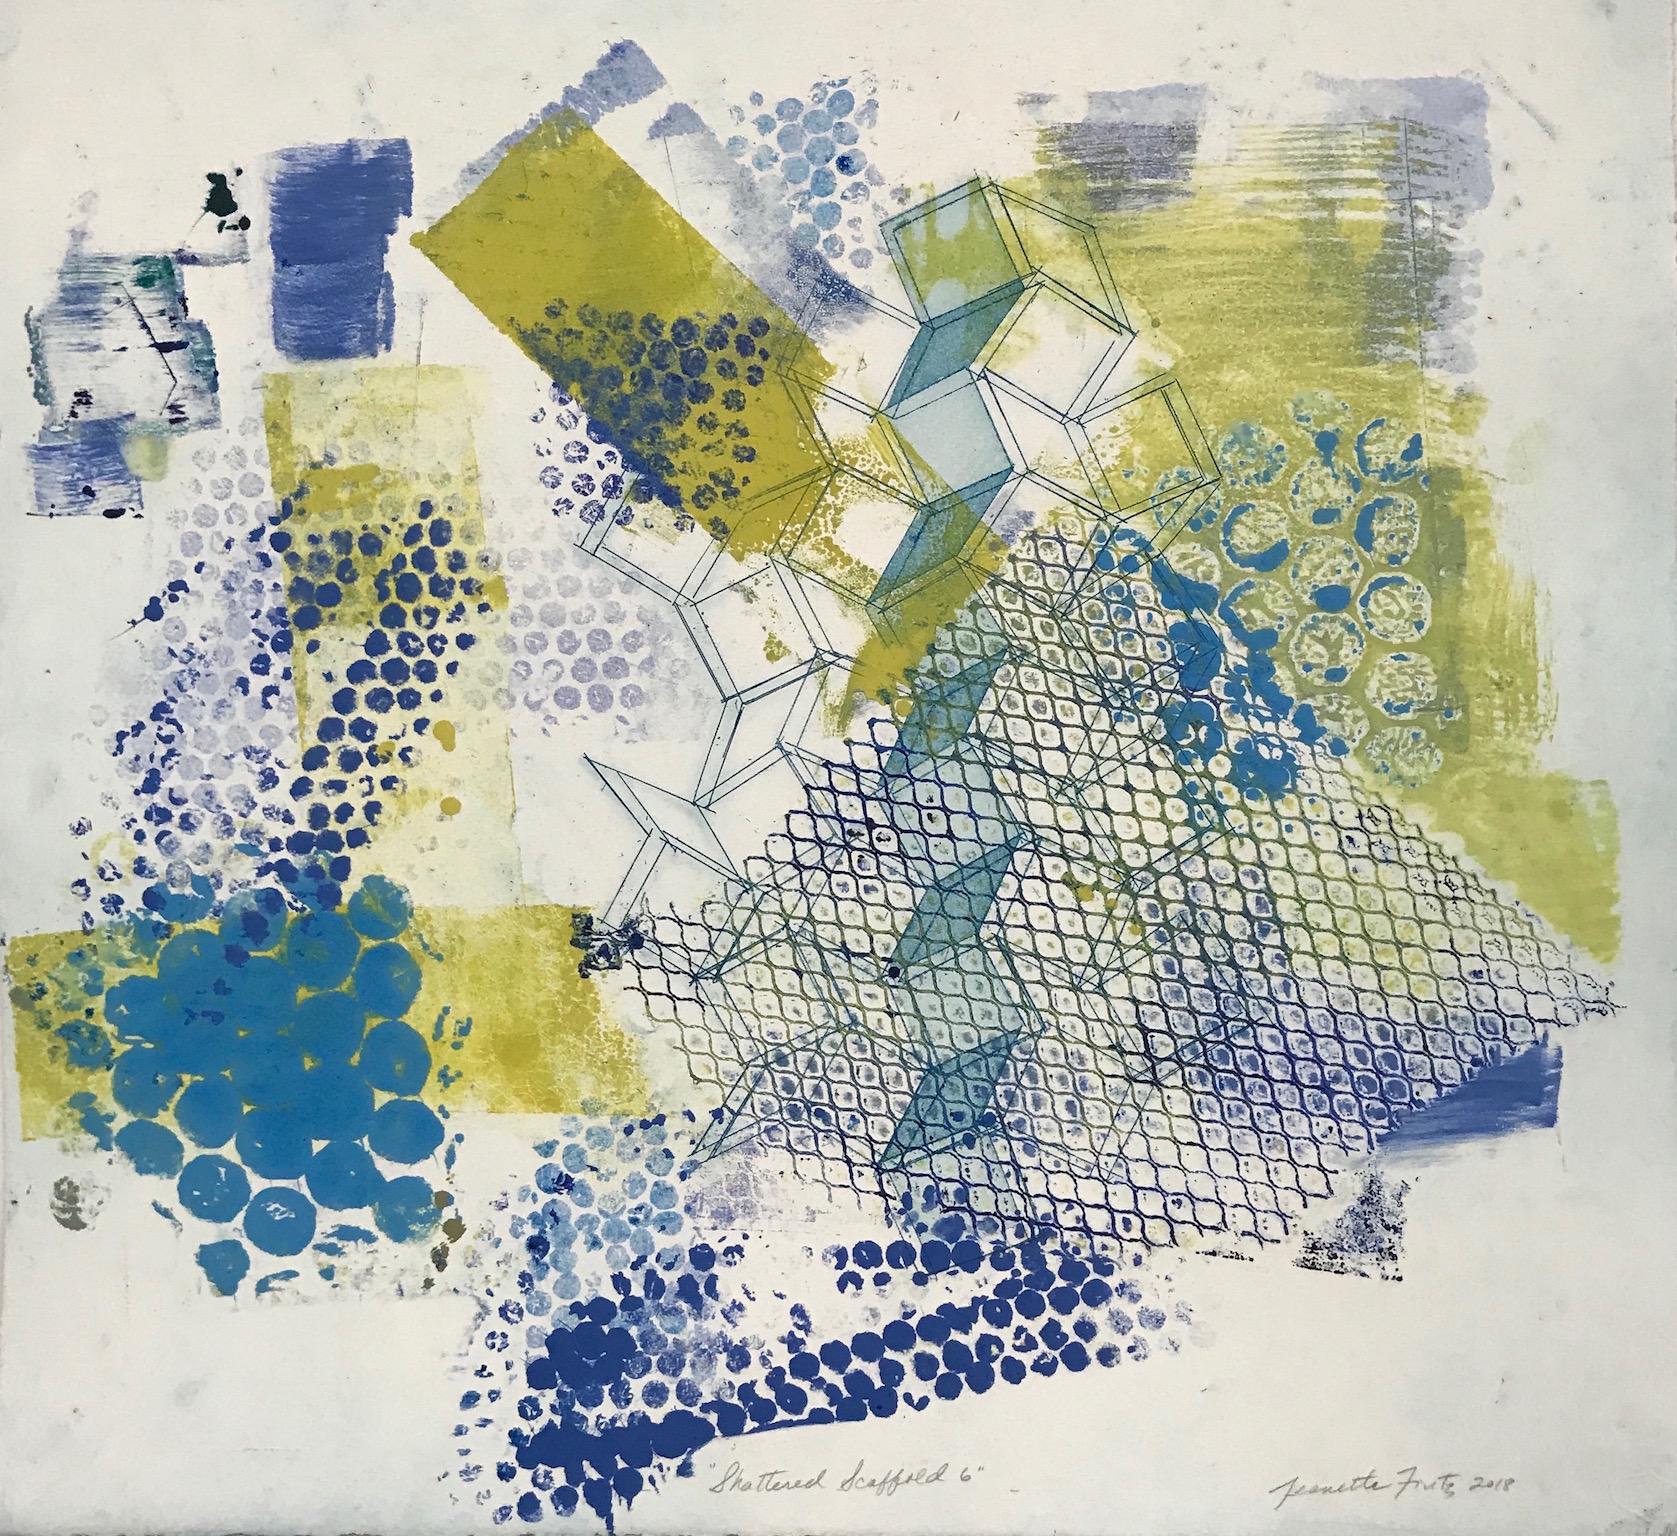 Jeanette Fintz Abstract Print - "Shattered Scaffold Six”, gestural abstract  monoprint, blue, yellow green.